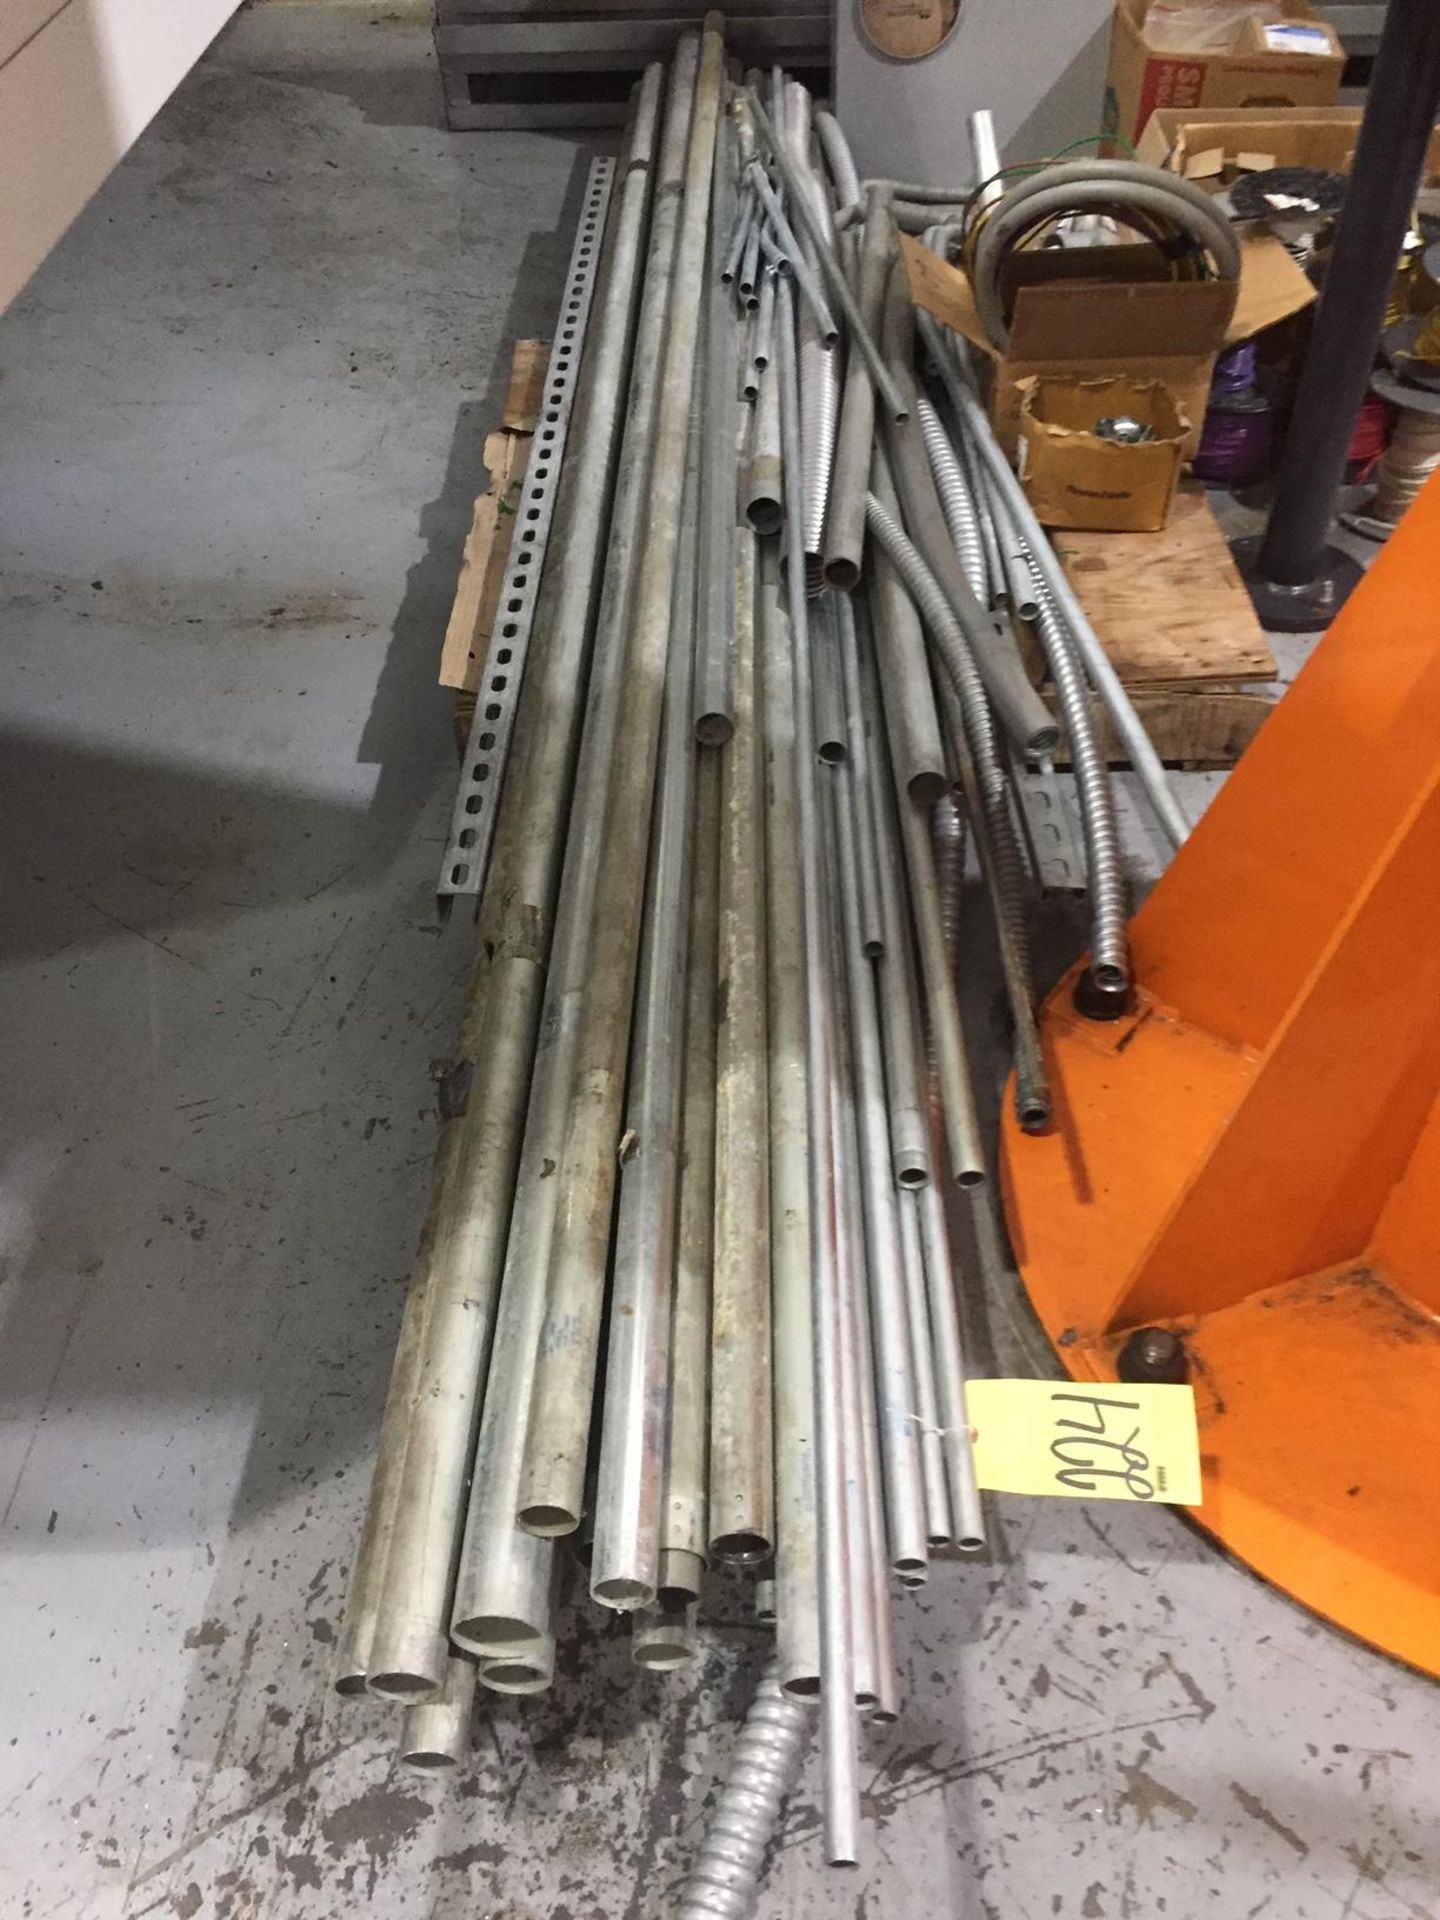 LOT CONSISTING OF ASSORTMENT OF ELECTRICAL BUILDING SUPPLIES